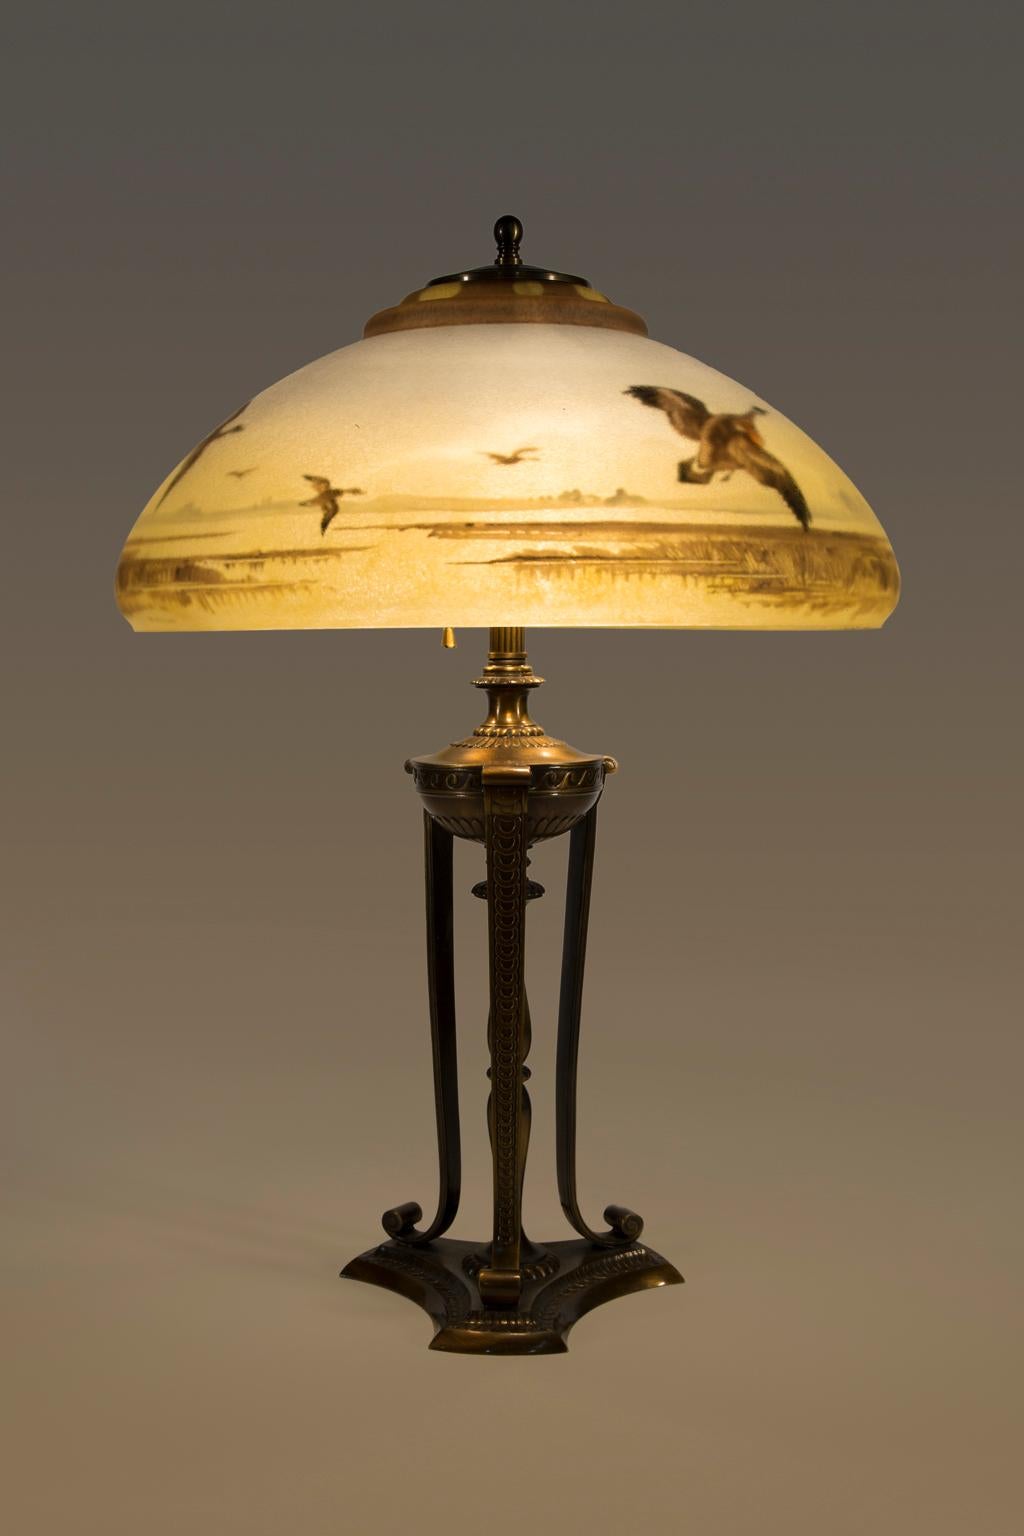 SALE ONE WEEK ONLY

This is a beautiful brass and glass lamp with a flock of geese in flight over a water landscape. Shading of sky has the soft blue and golden color of an evening sunset. 

Pairpoint is known for three kinds of glass lampshades,